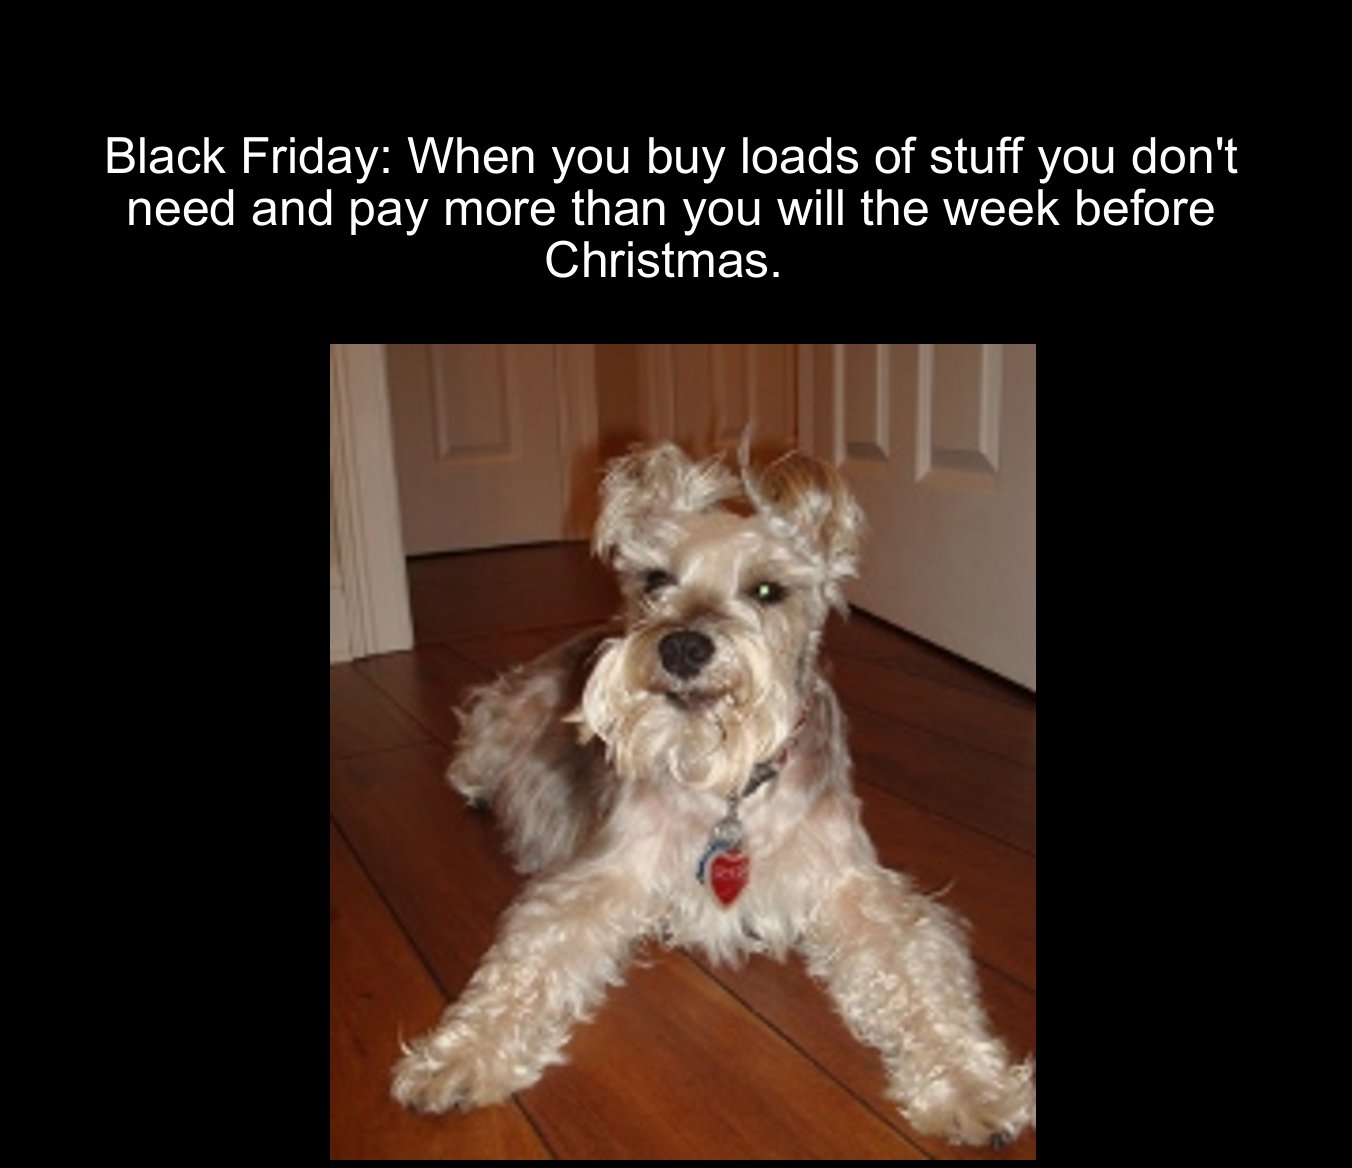 dog - Black Friday When you buy loads of stuff you don't need and pay more than you will the week before Christmas.